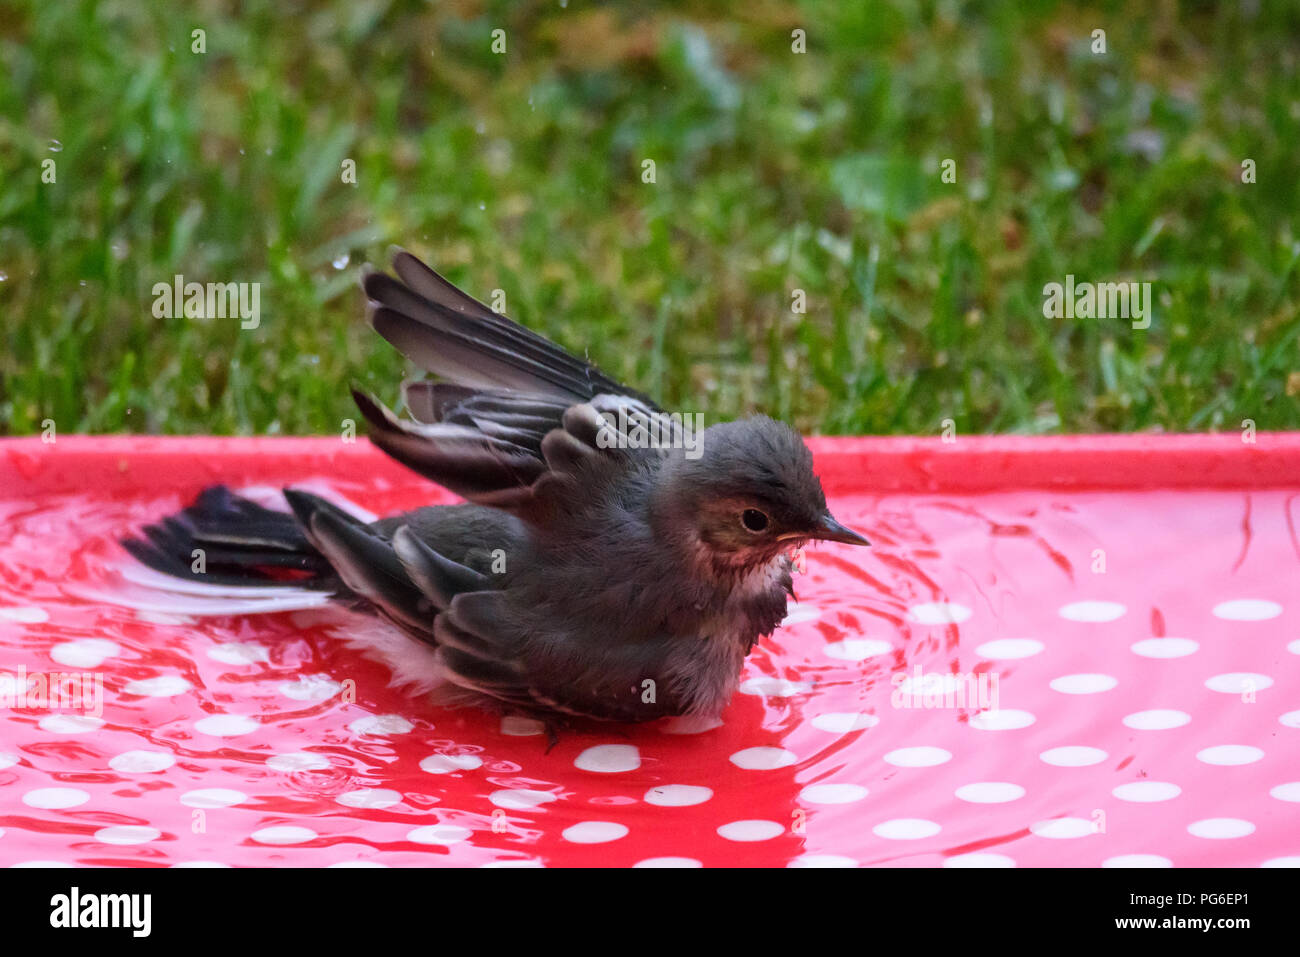 Baby white wagtail (Motacilla alba) bird washing in water on red plastic tray. Stock Photo